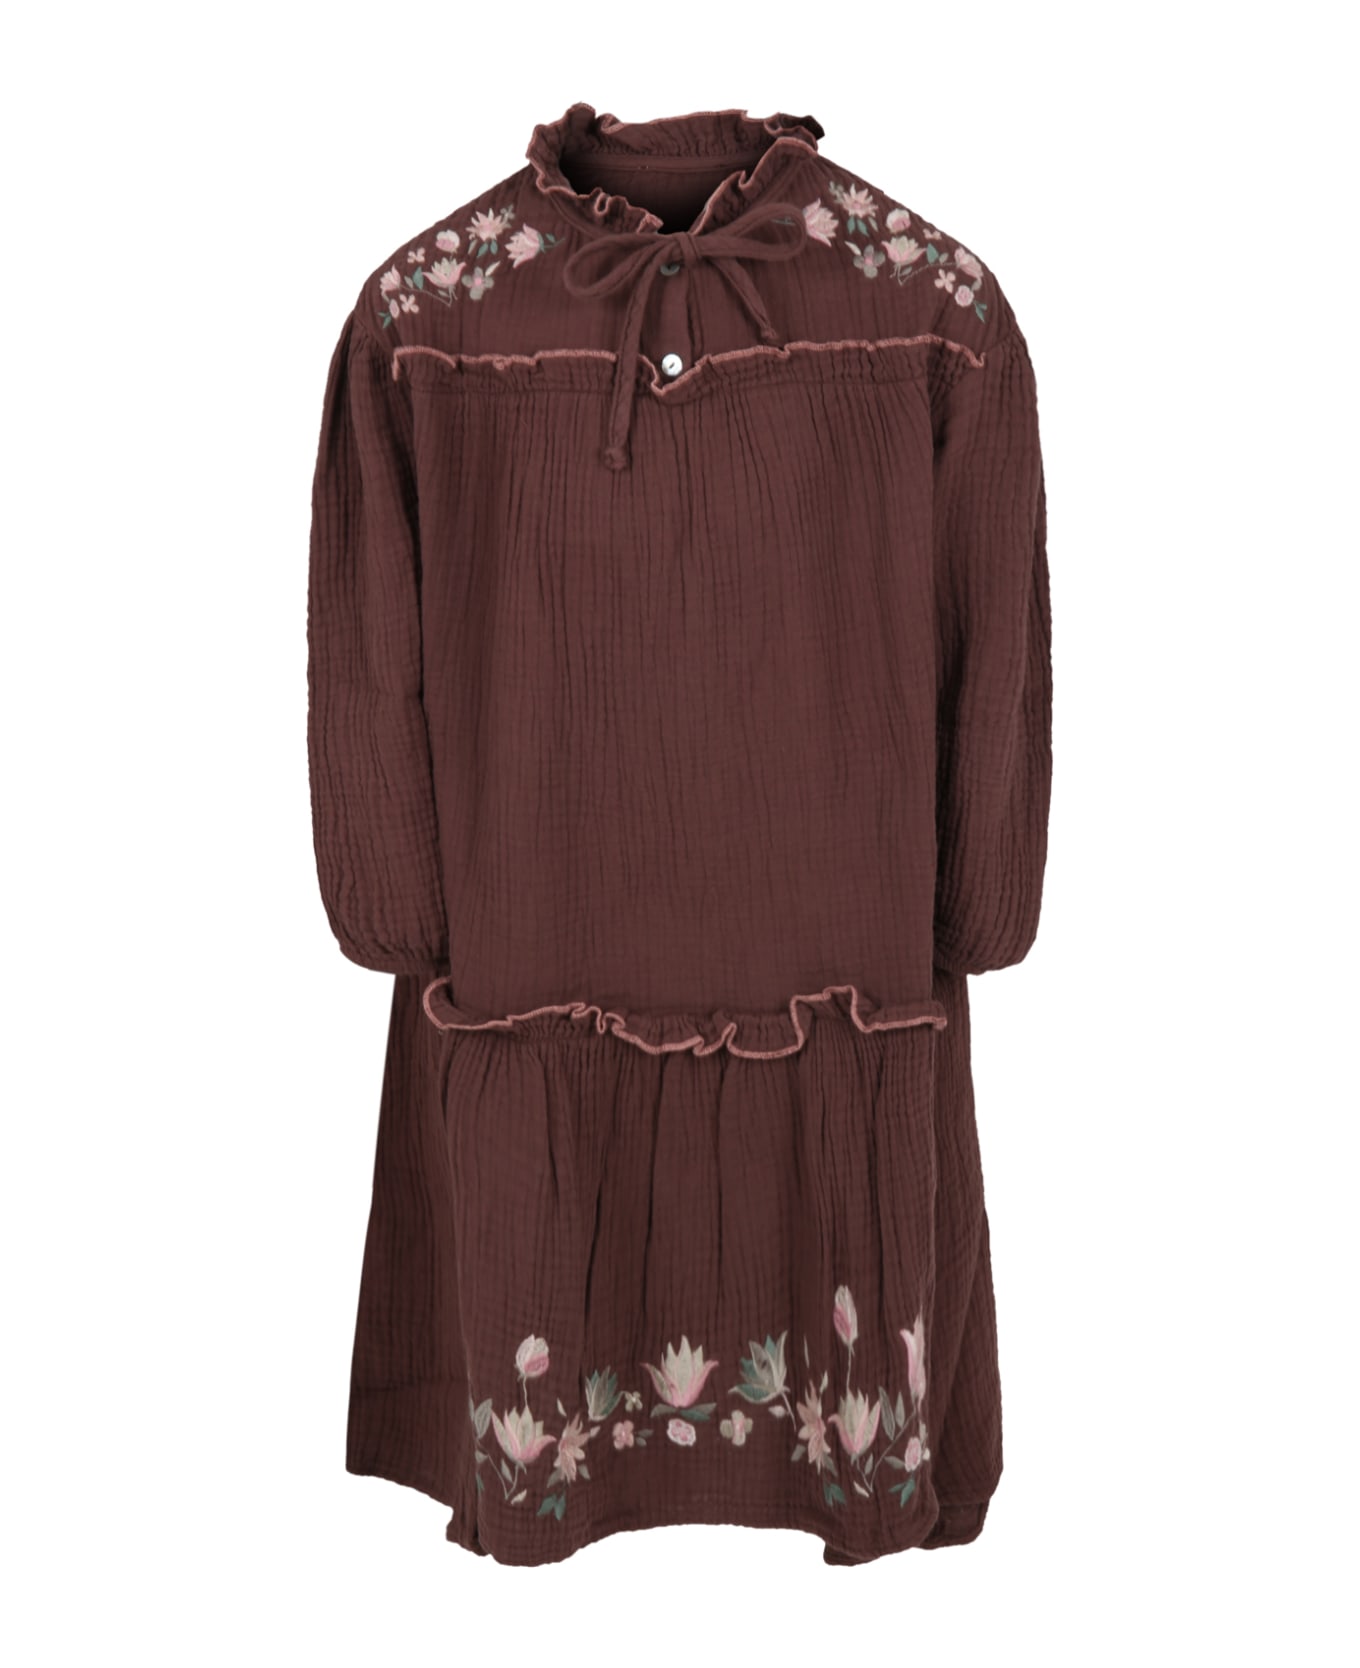 Coco Au Lait Brown Dress For Girl With Flowers - Brown